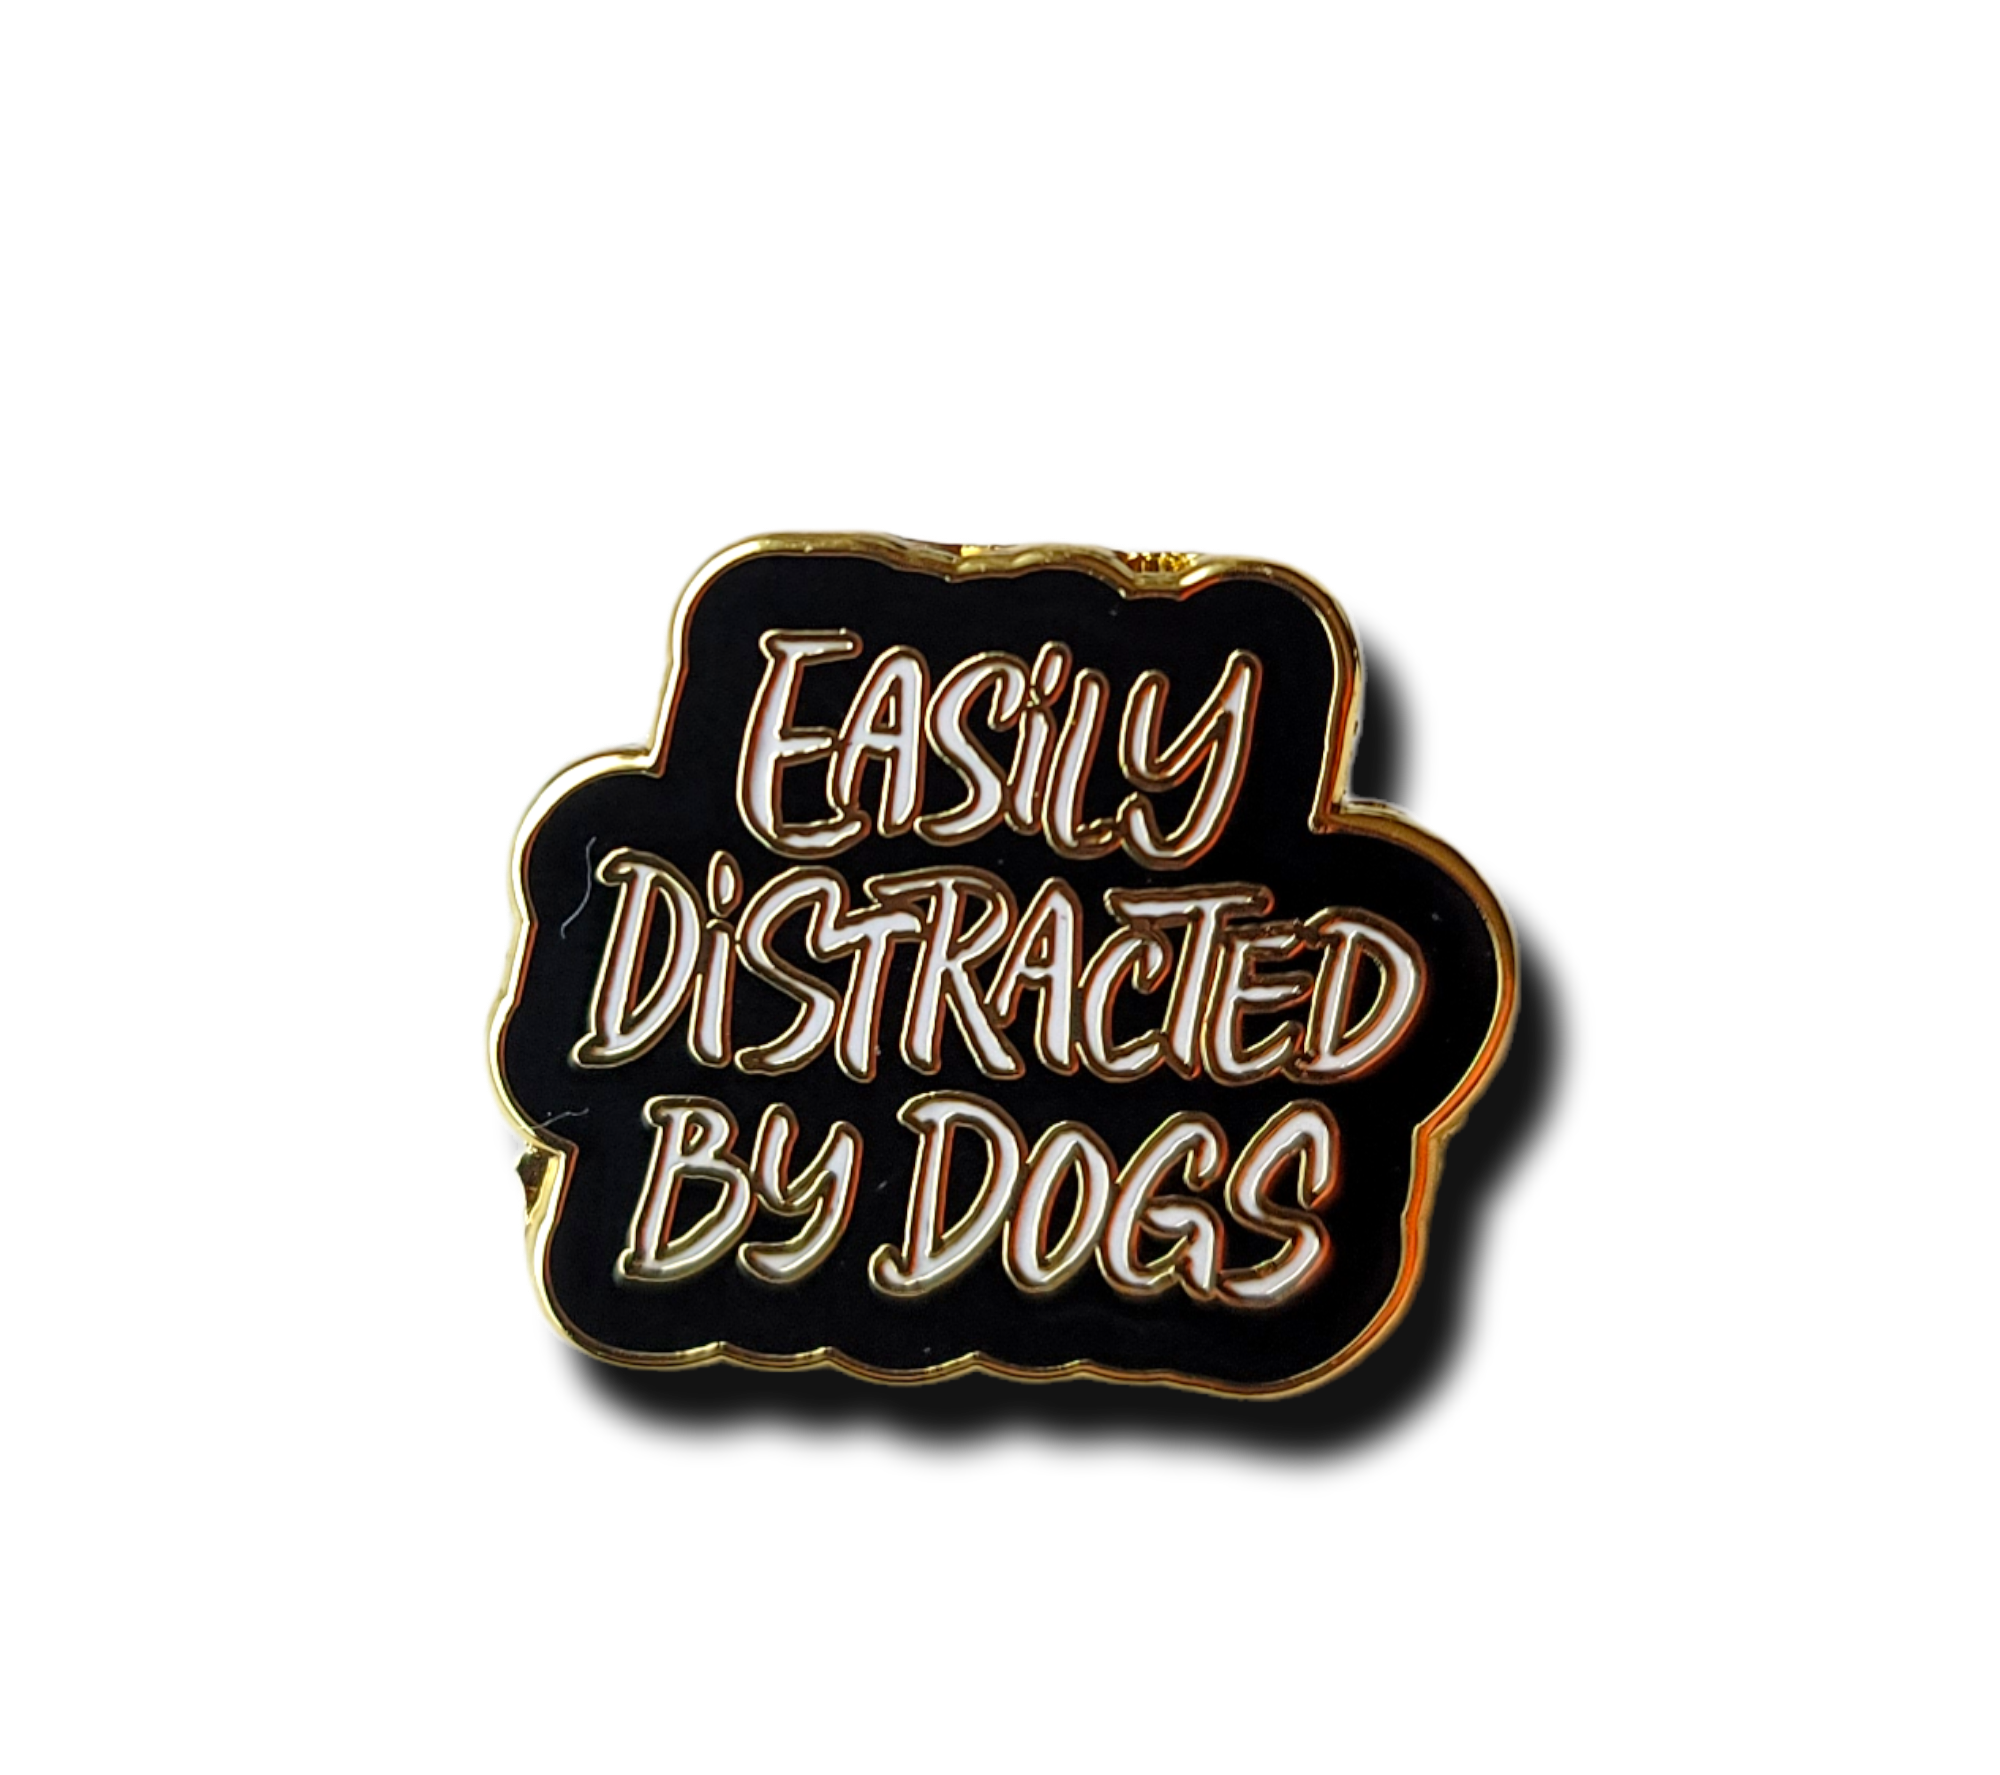 Easily Distracted by Dogs Pin